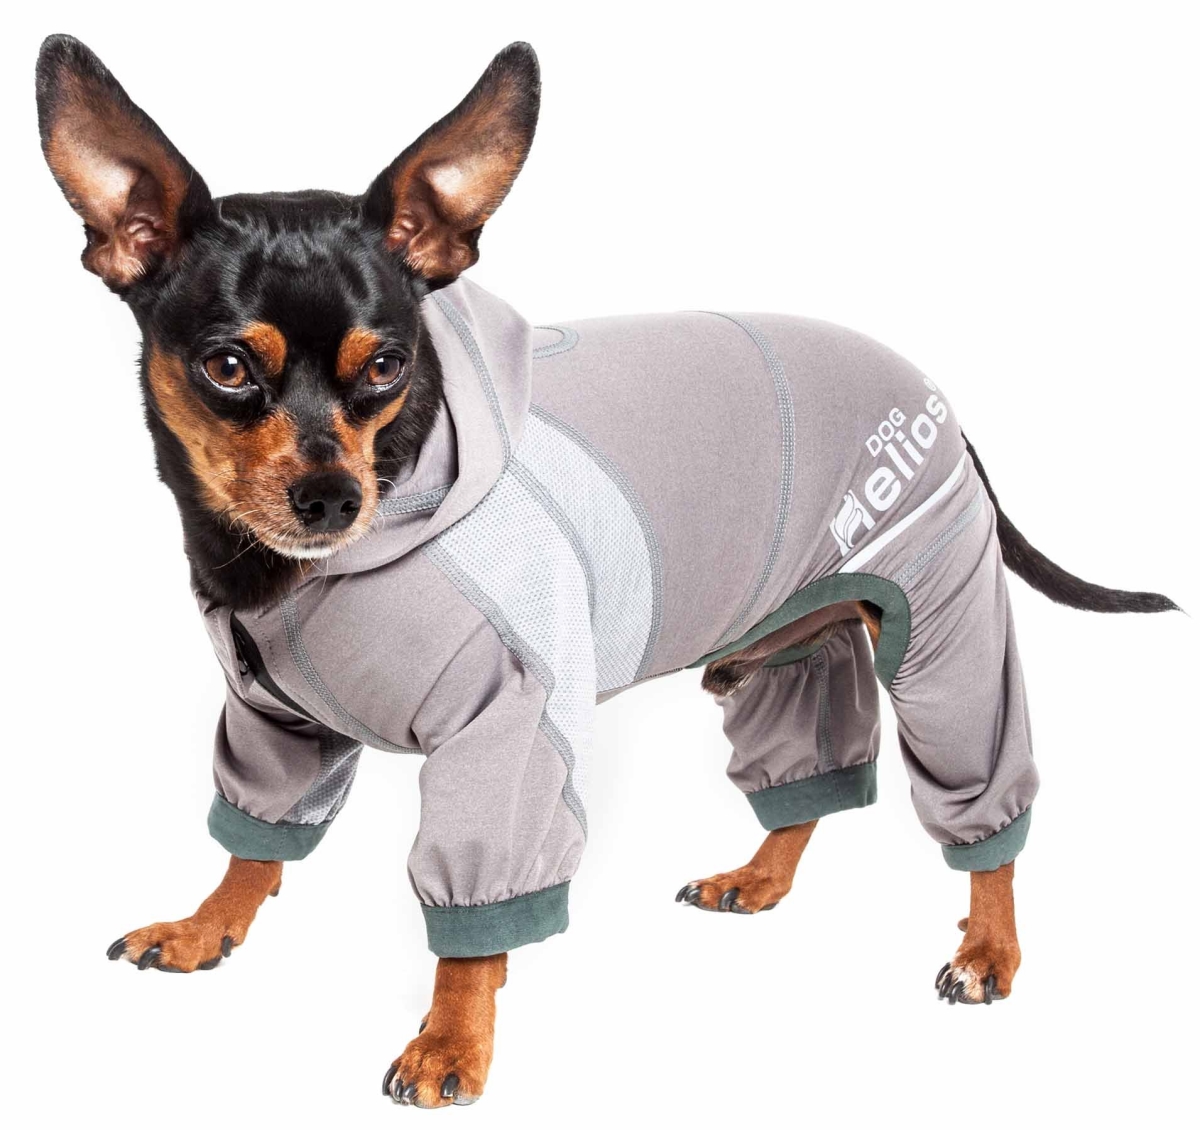 Yghl7gyxs Namastail 4-way Stretch Breathable Full Bodied Performance Yoga Dog Hoodie Tracksuit - Grey, Extra Small